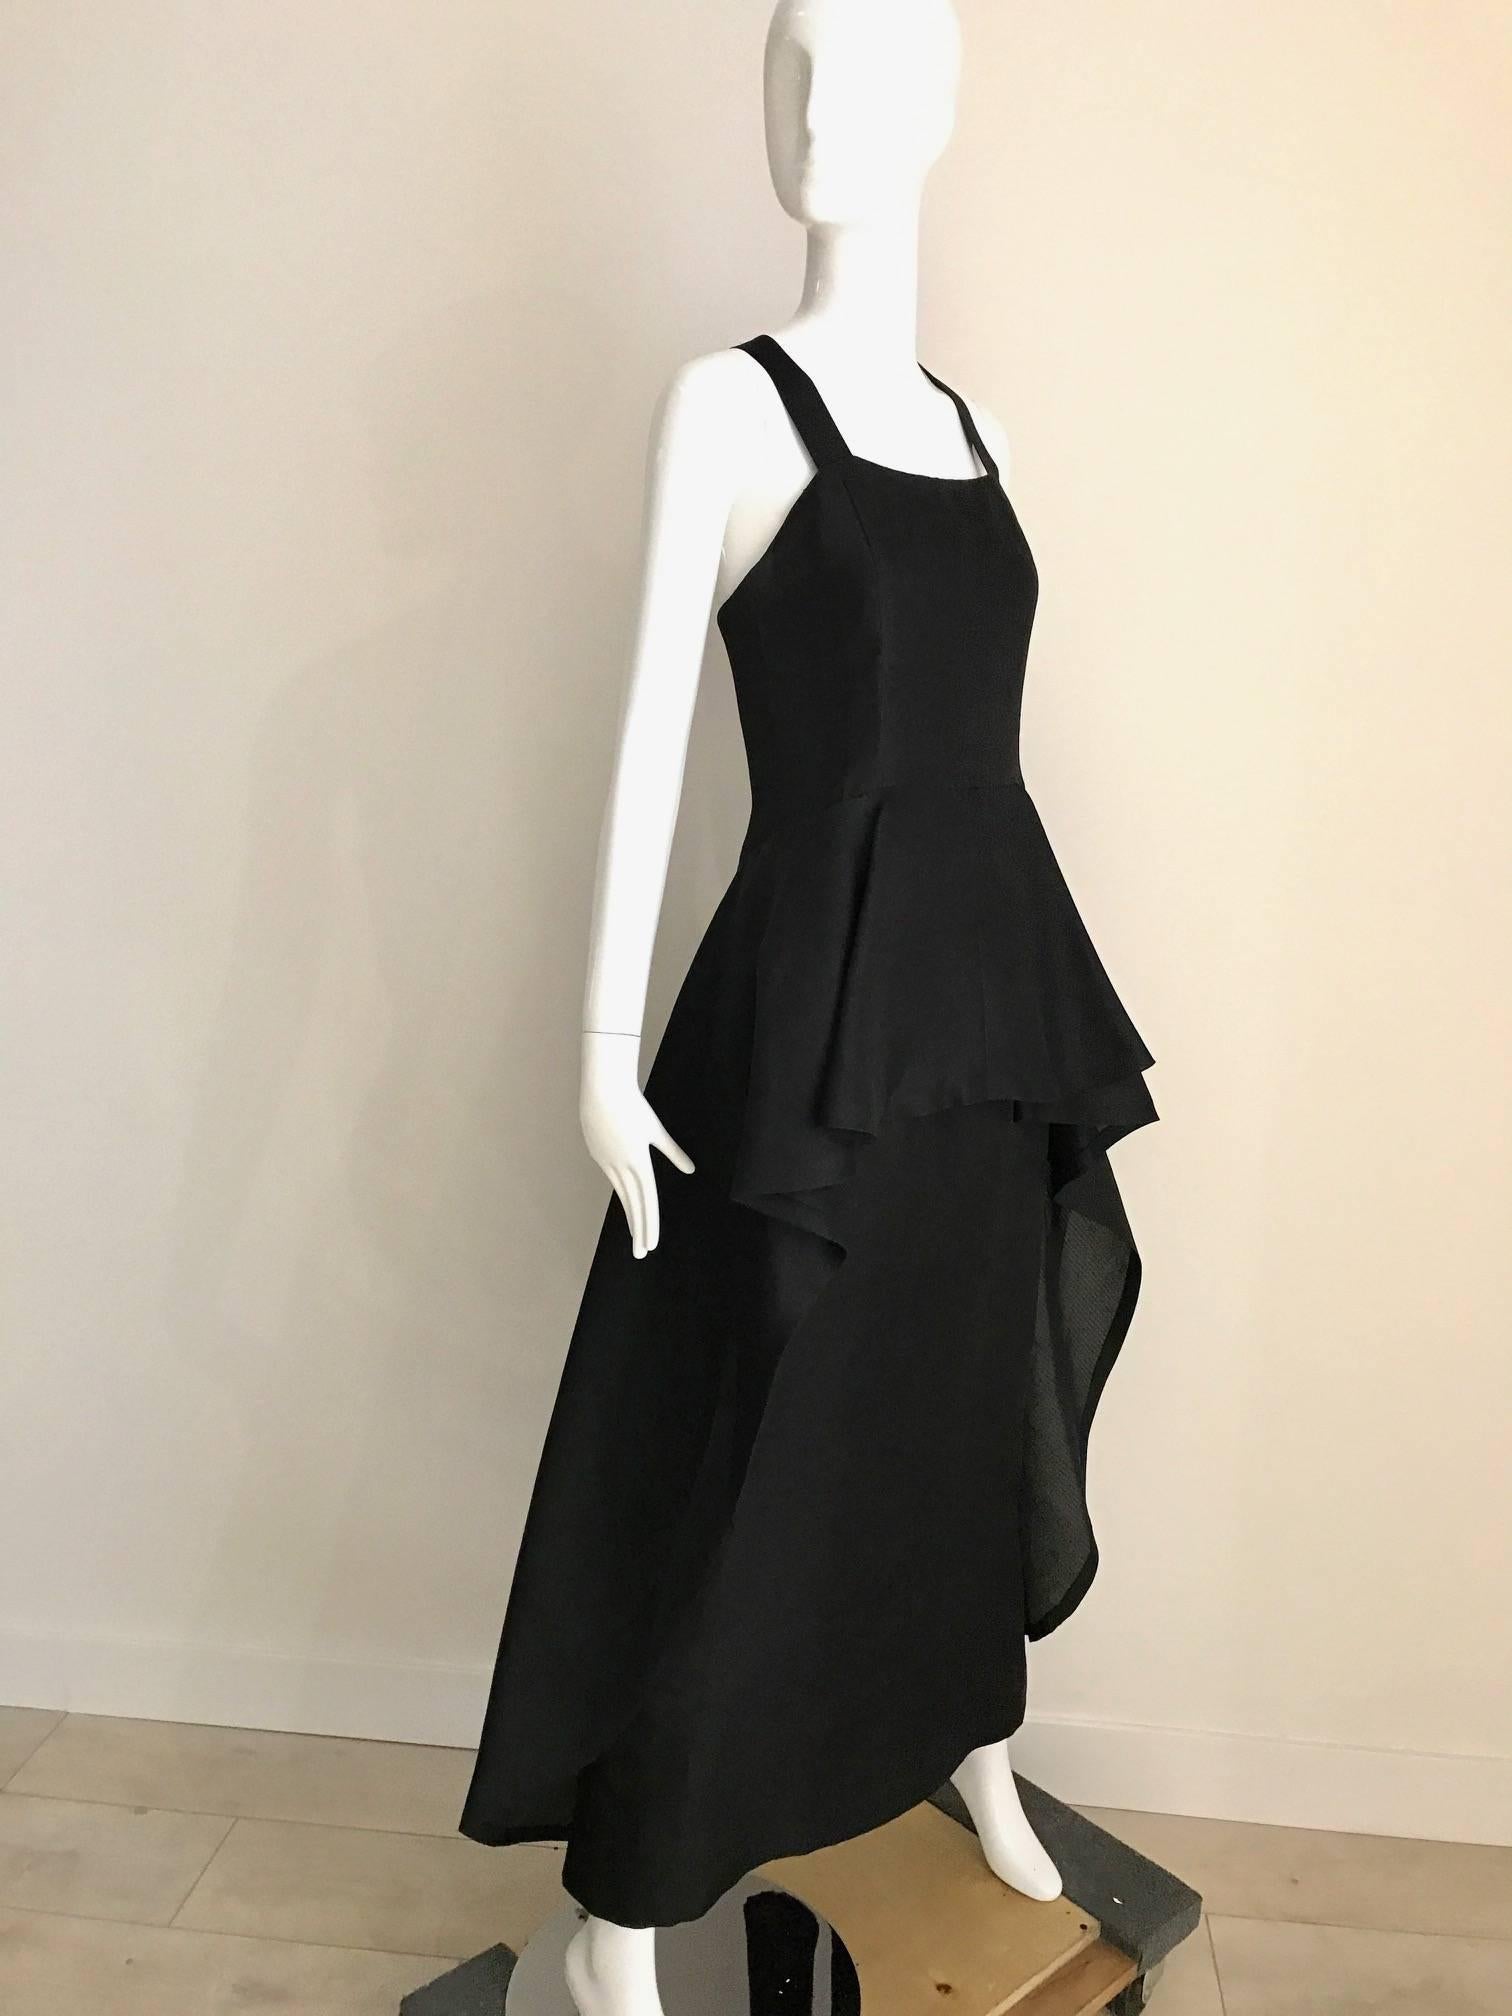 Timeless and chic Vintage Givenchy black silk organza gown with cris cross back and slightly cascading peplum hem. This vintage Givenchy gown is a signature look epitomized Audrey Hepburn classically chic style.
Bust: 32 inch
Waist: 27 inch
Hip: 39